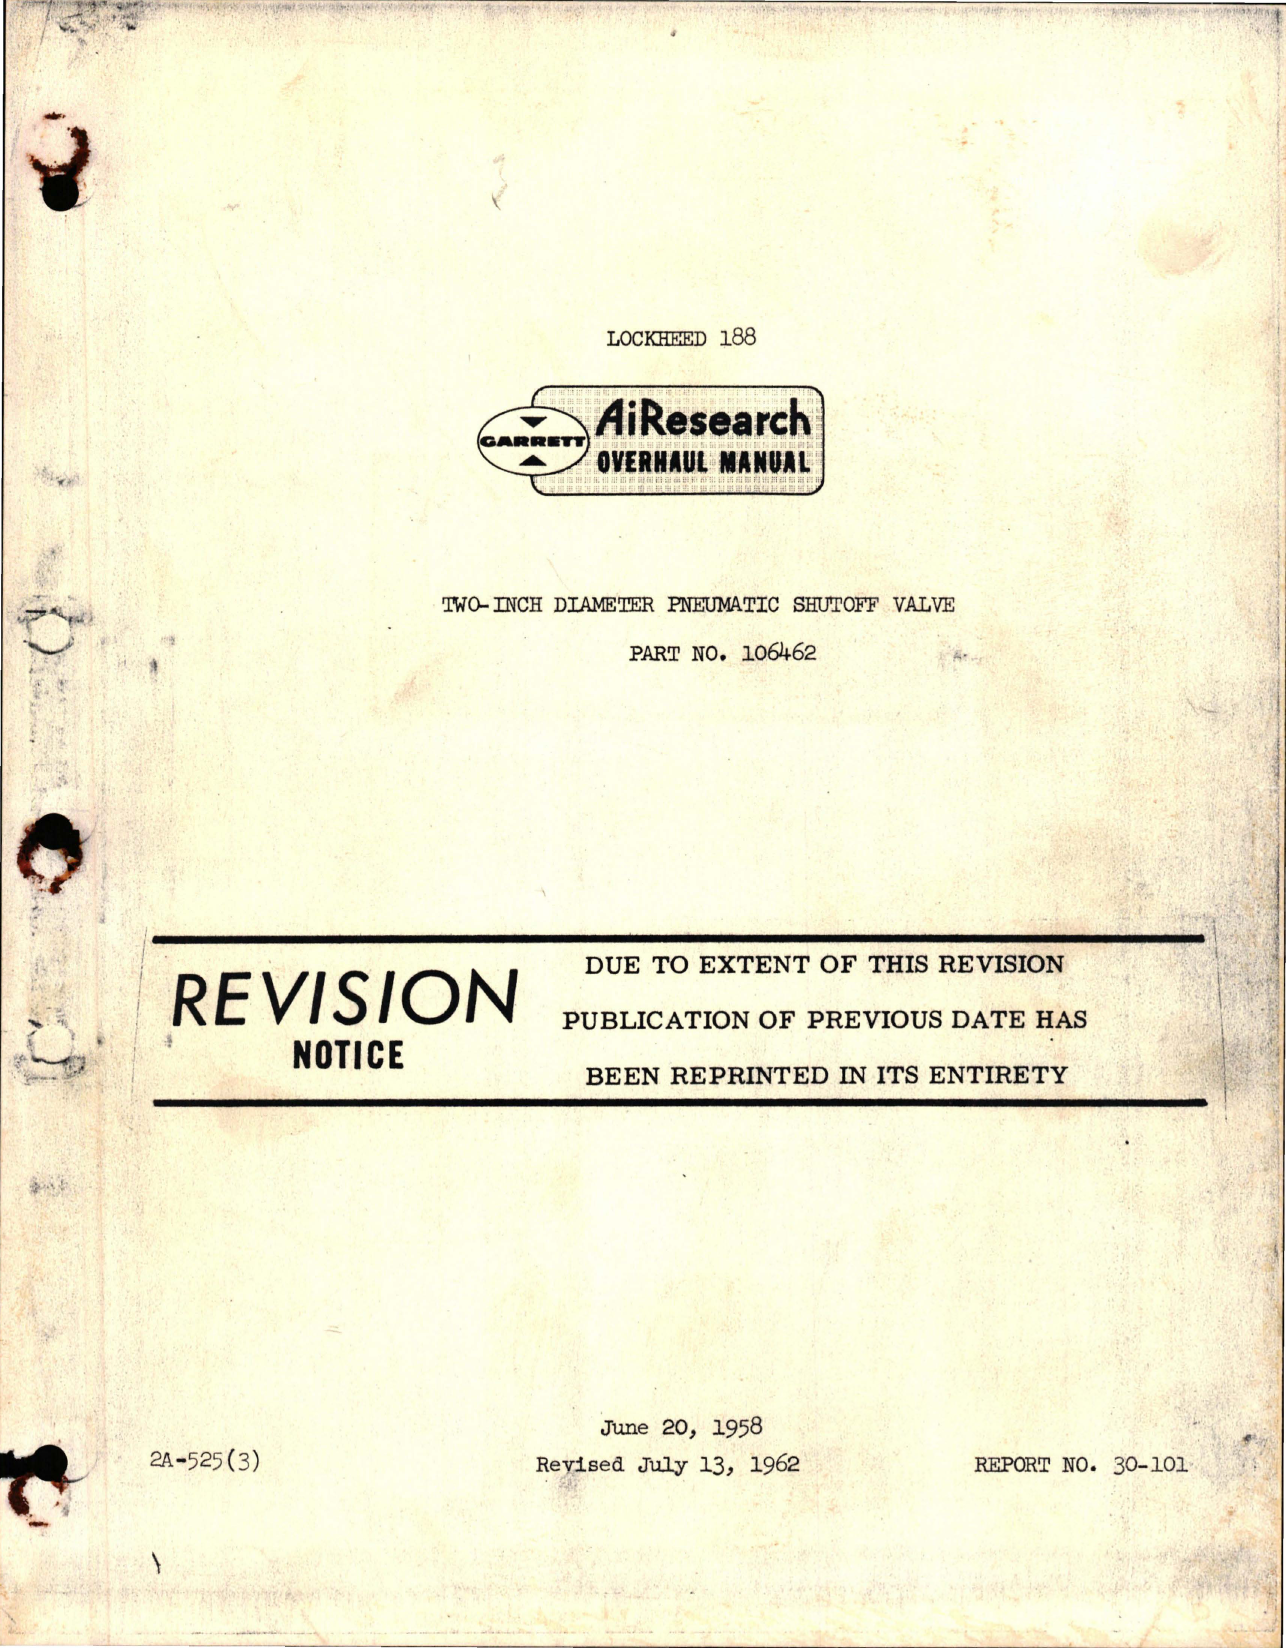 Sample page 1 from AirCorps Library document: Overhaul Manual for Two-Inch Diameter Pneumatic Shutoff Valve - Part 106462 